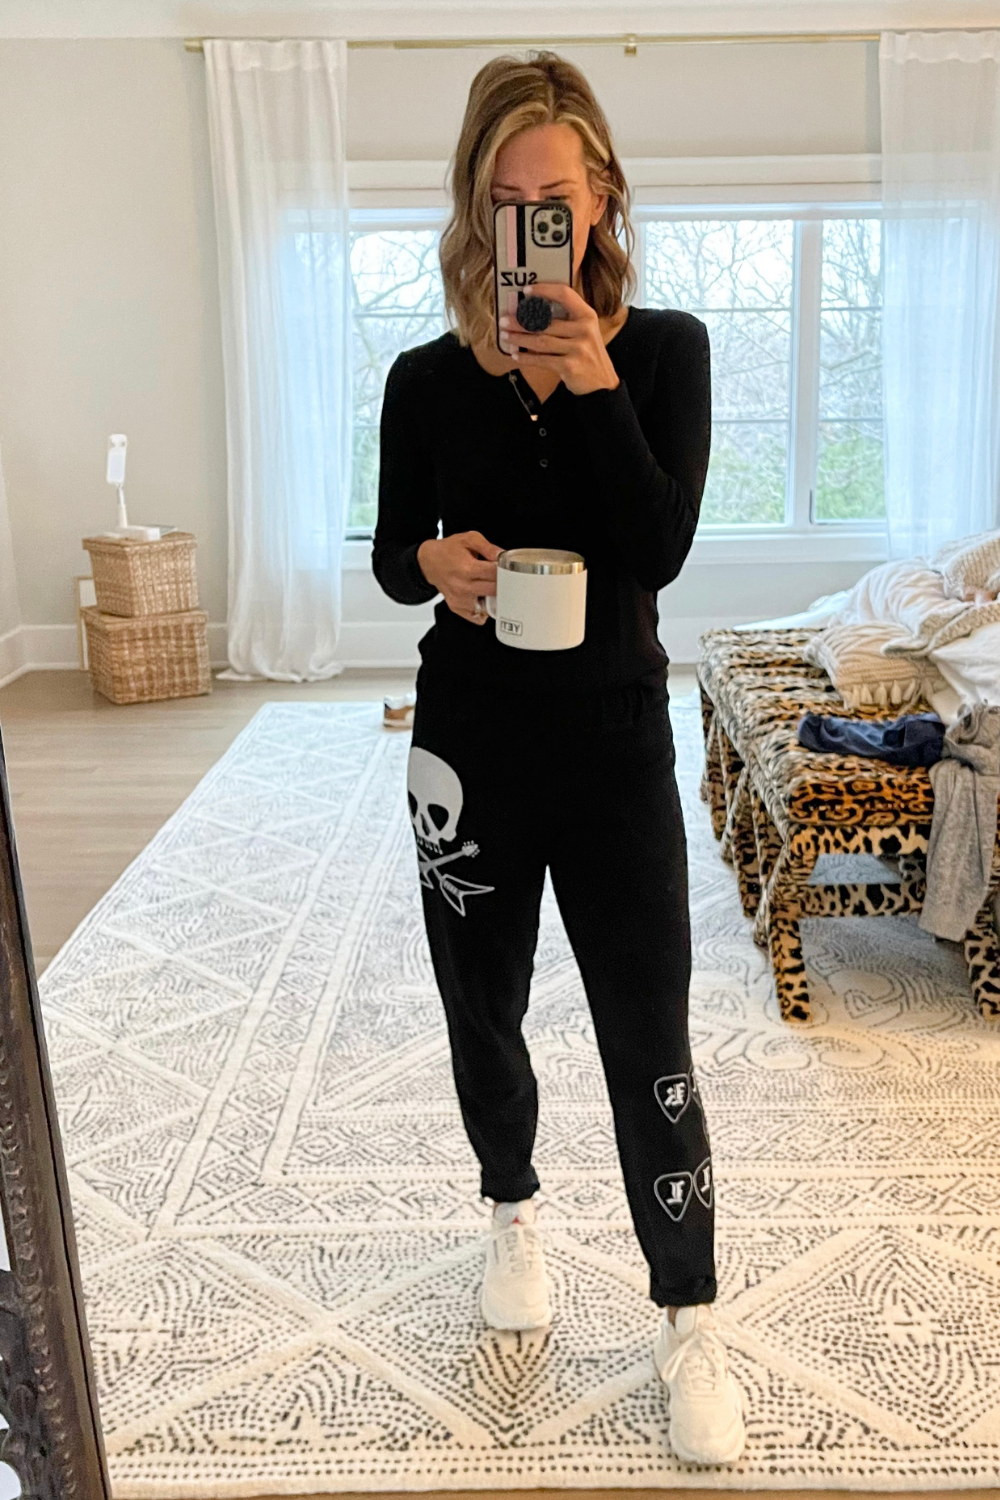 Suzanne wearing sweatpants, a henley, and sneakers